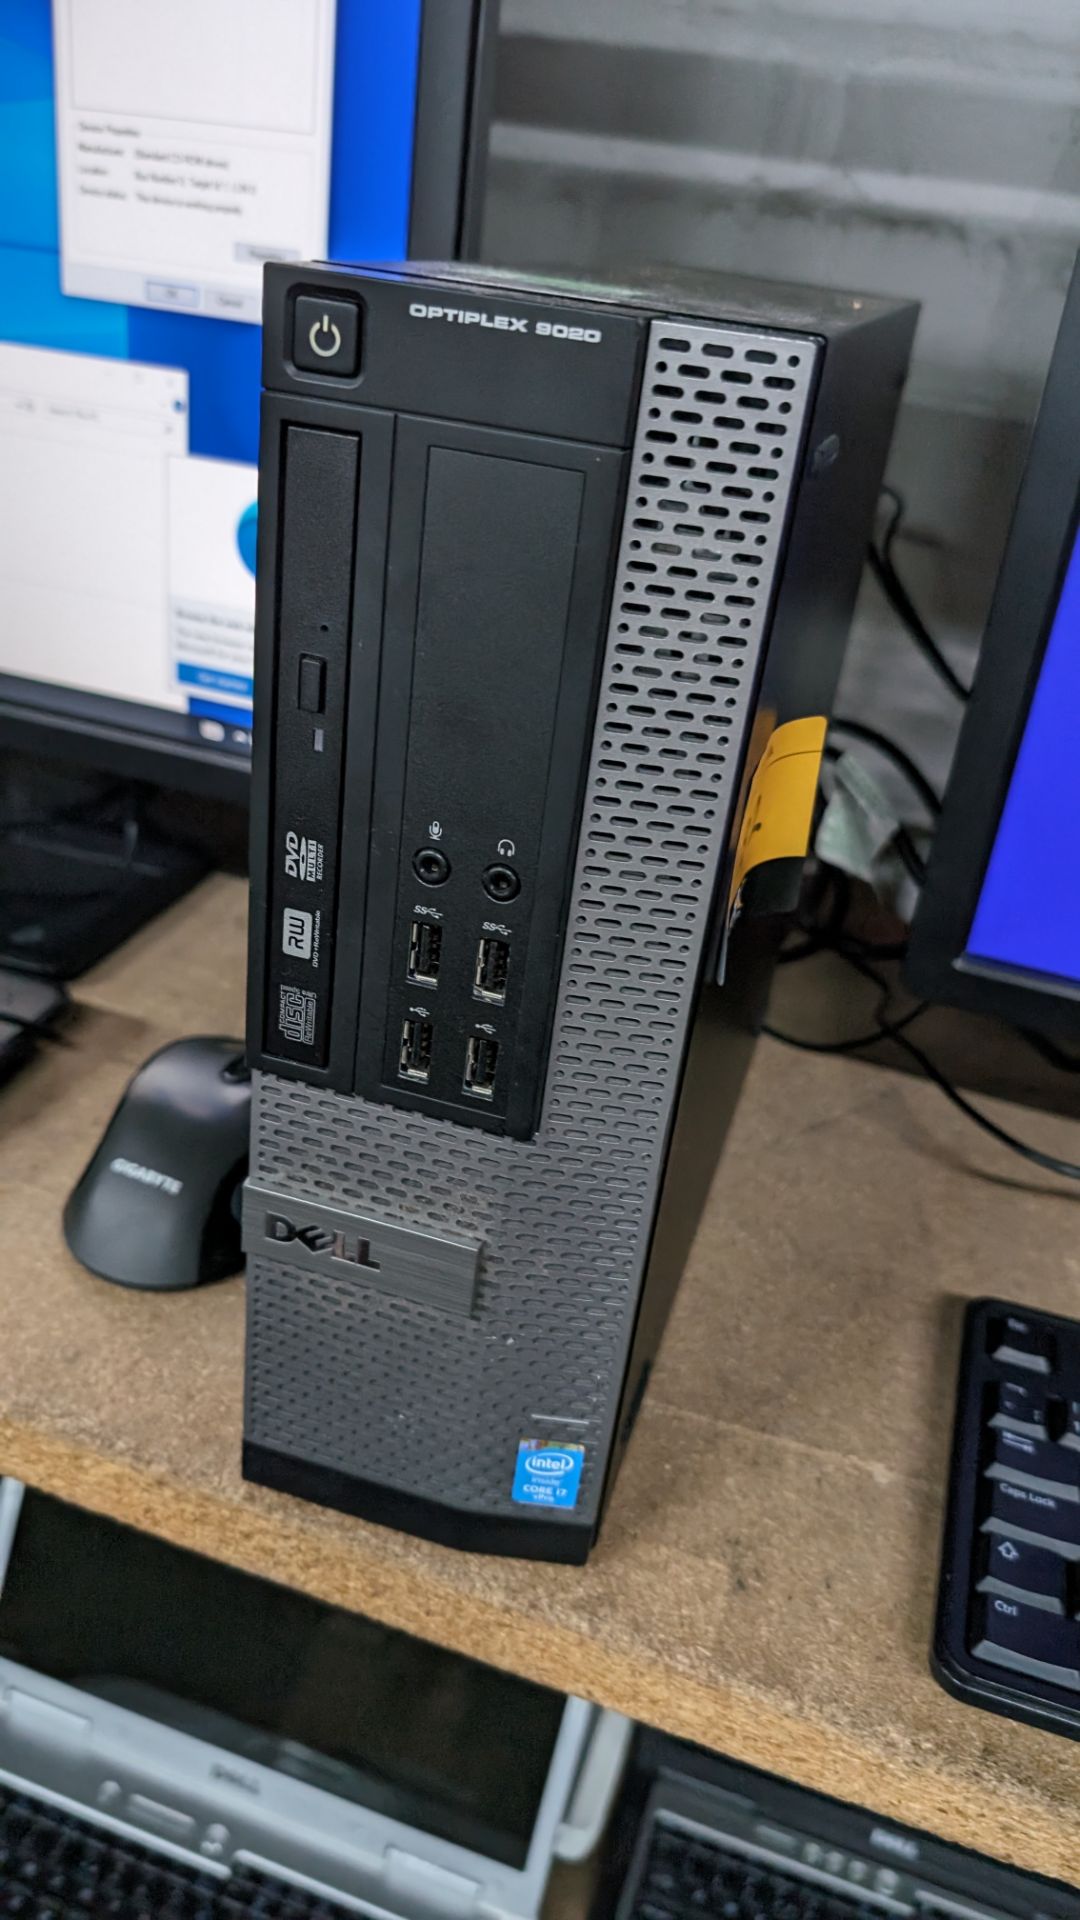 Dell Optiplex 9020 compact tower computer with Intel i7 vPro processor, including widescreen monitor - Image 7 of 18